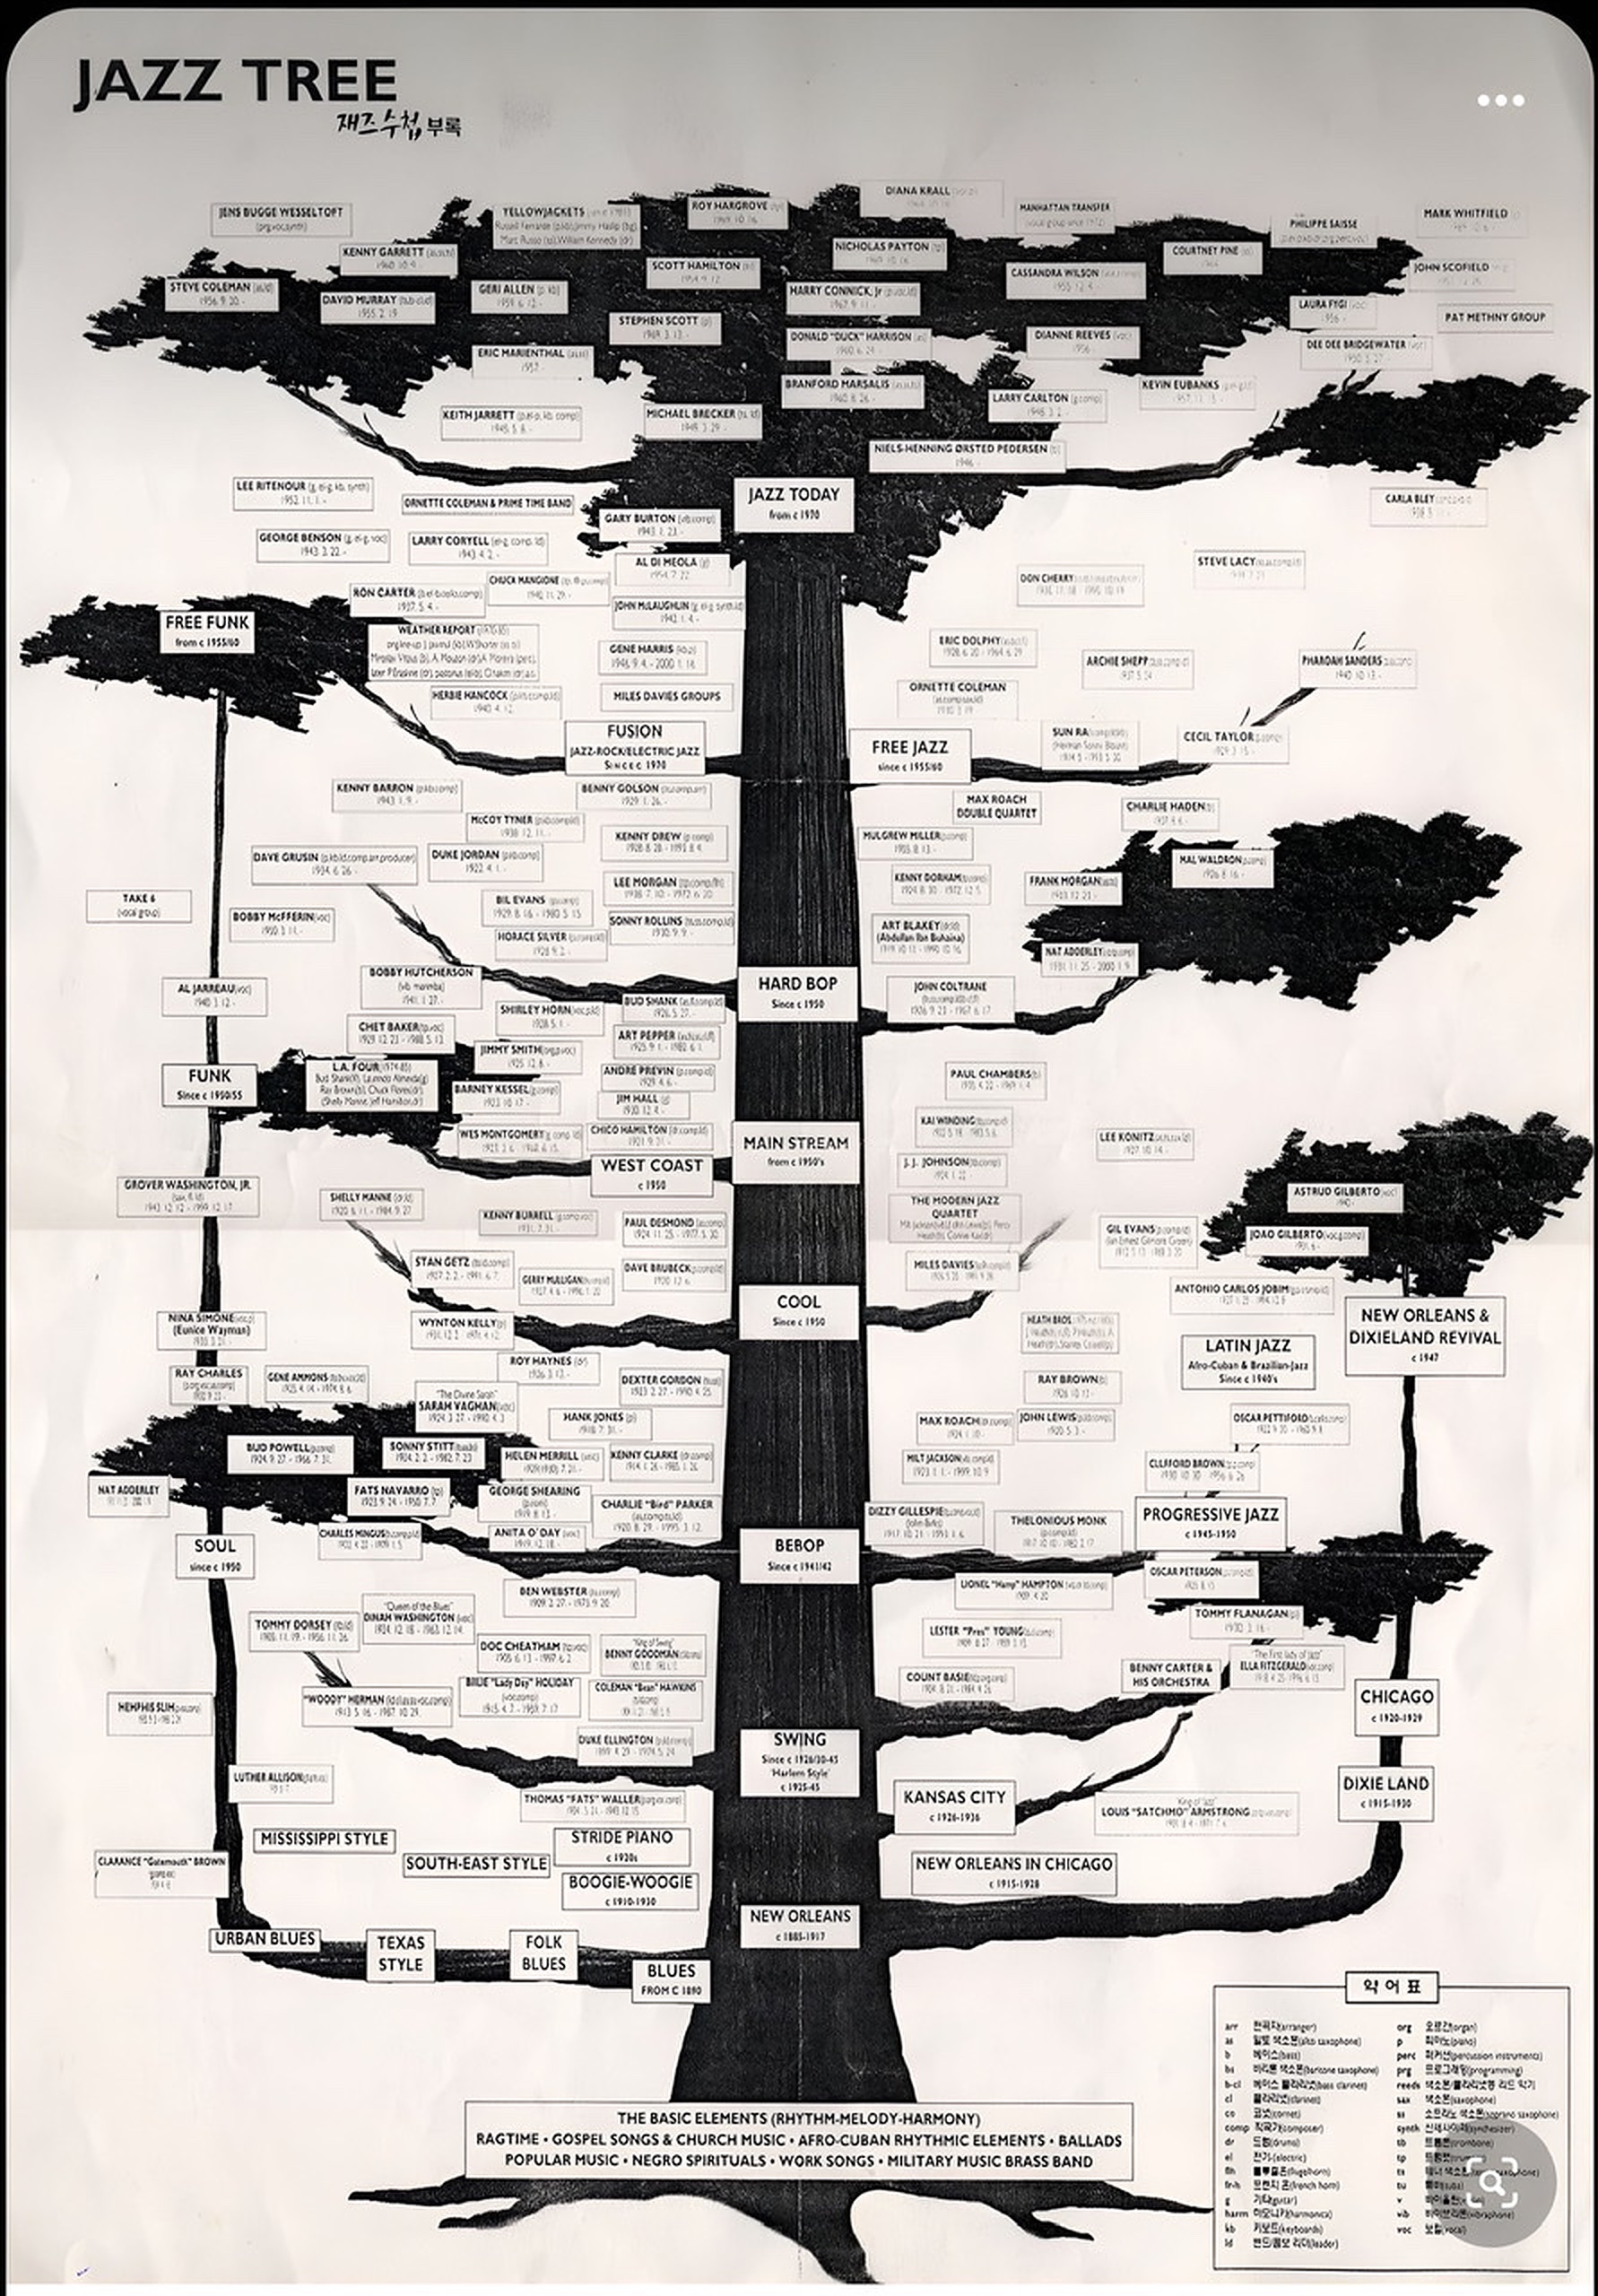 A jazz tree connecting the history of jazz sub-genres and listing representative players of those styles.